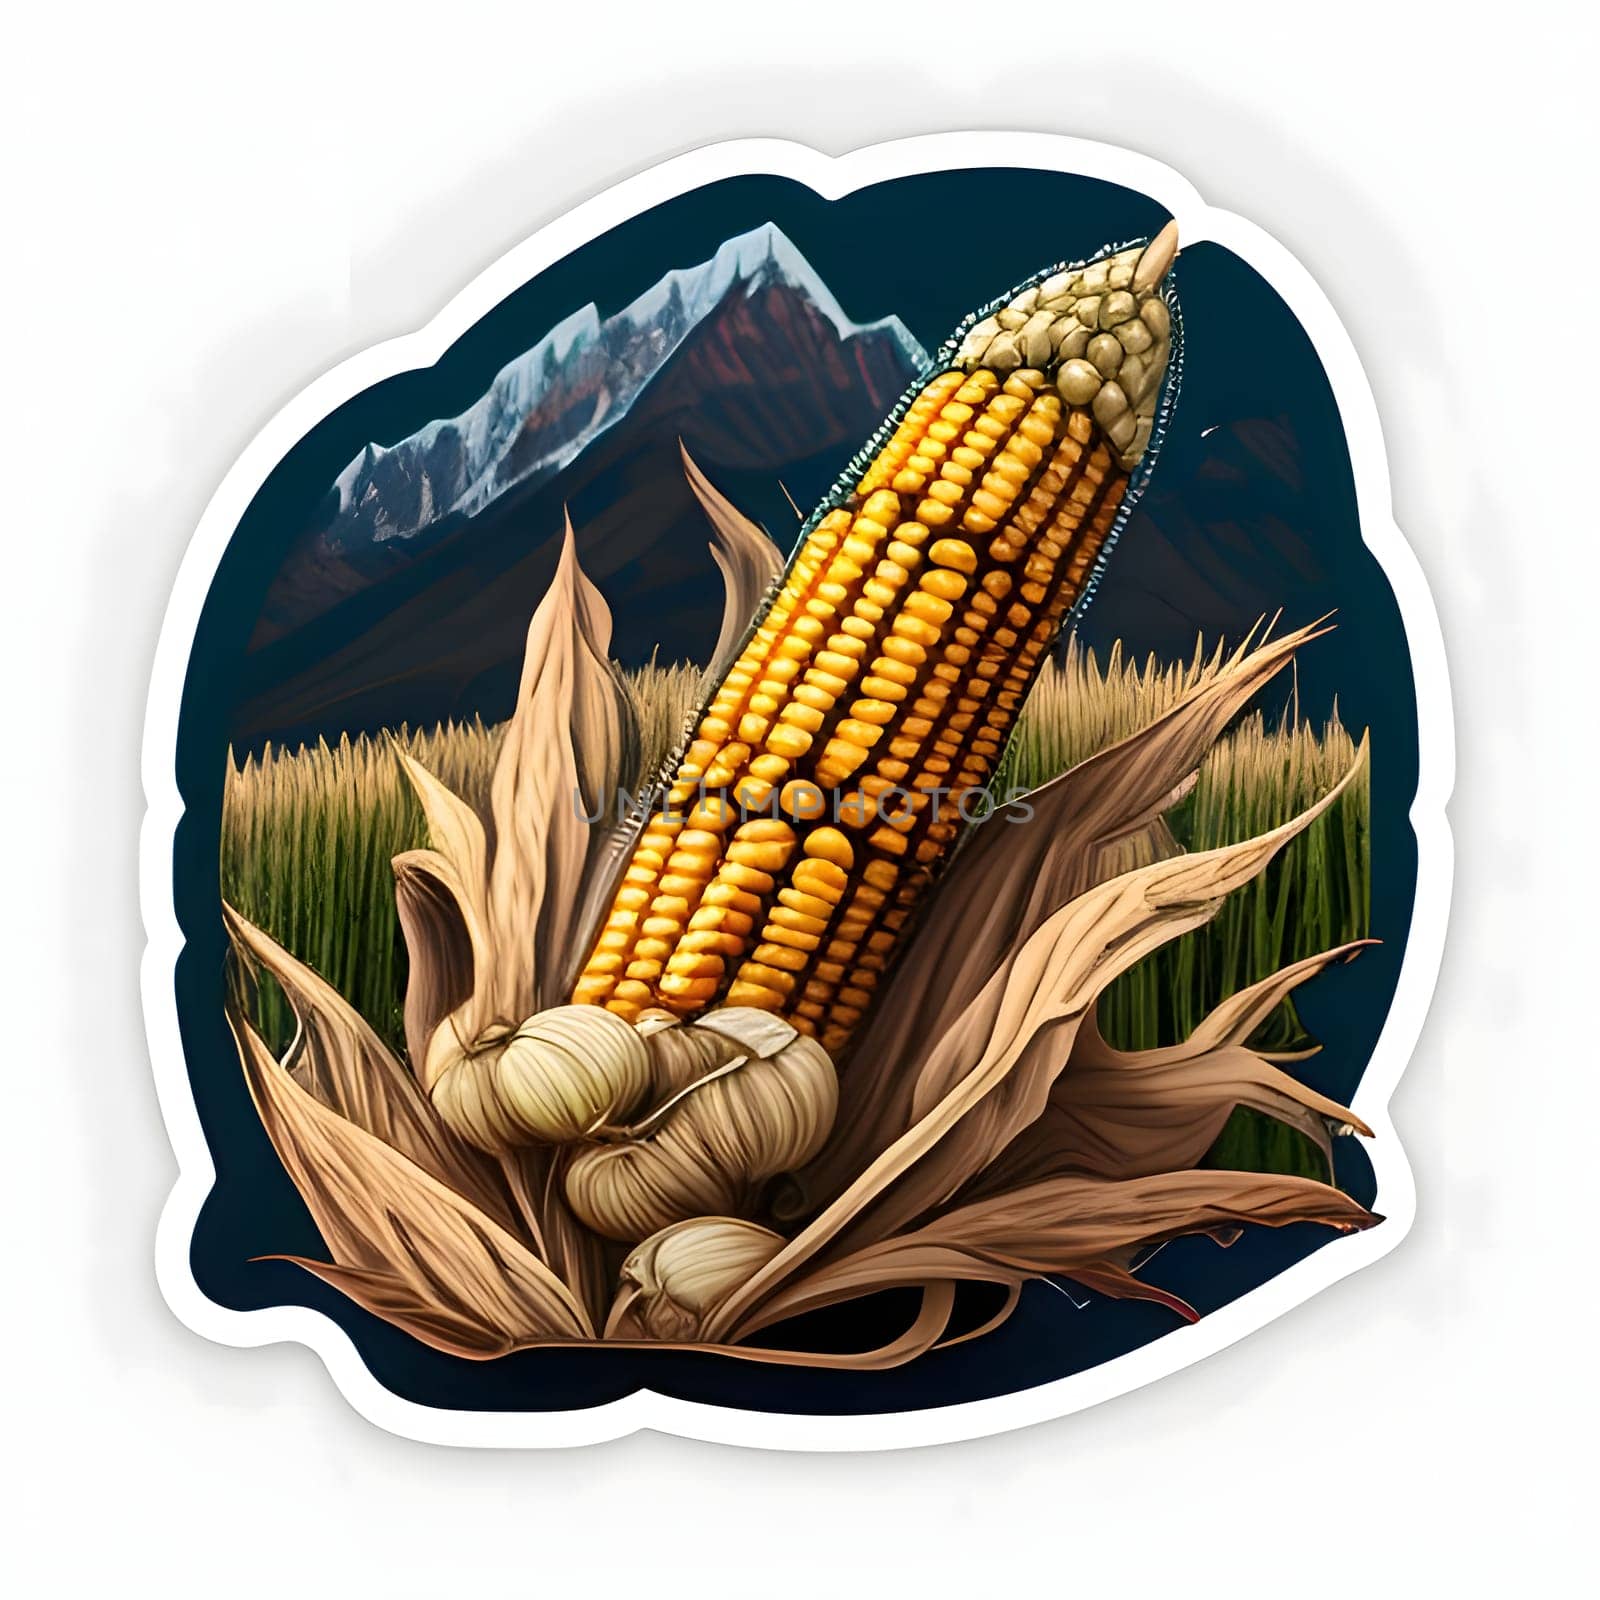 Sticker corn cob. In the background a field and mountains. Corn as a dish of thanksgiving for the harvest, picture on a white isolated background. An atmosphere of joy and celebration.